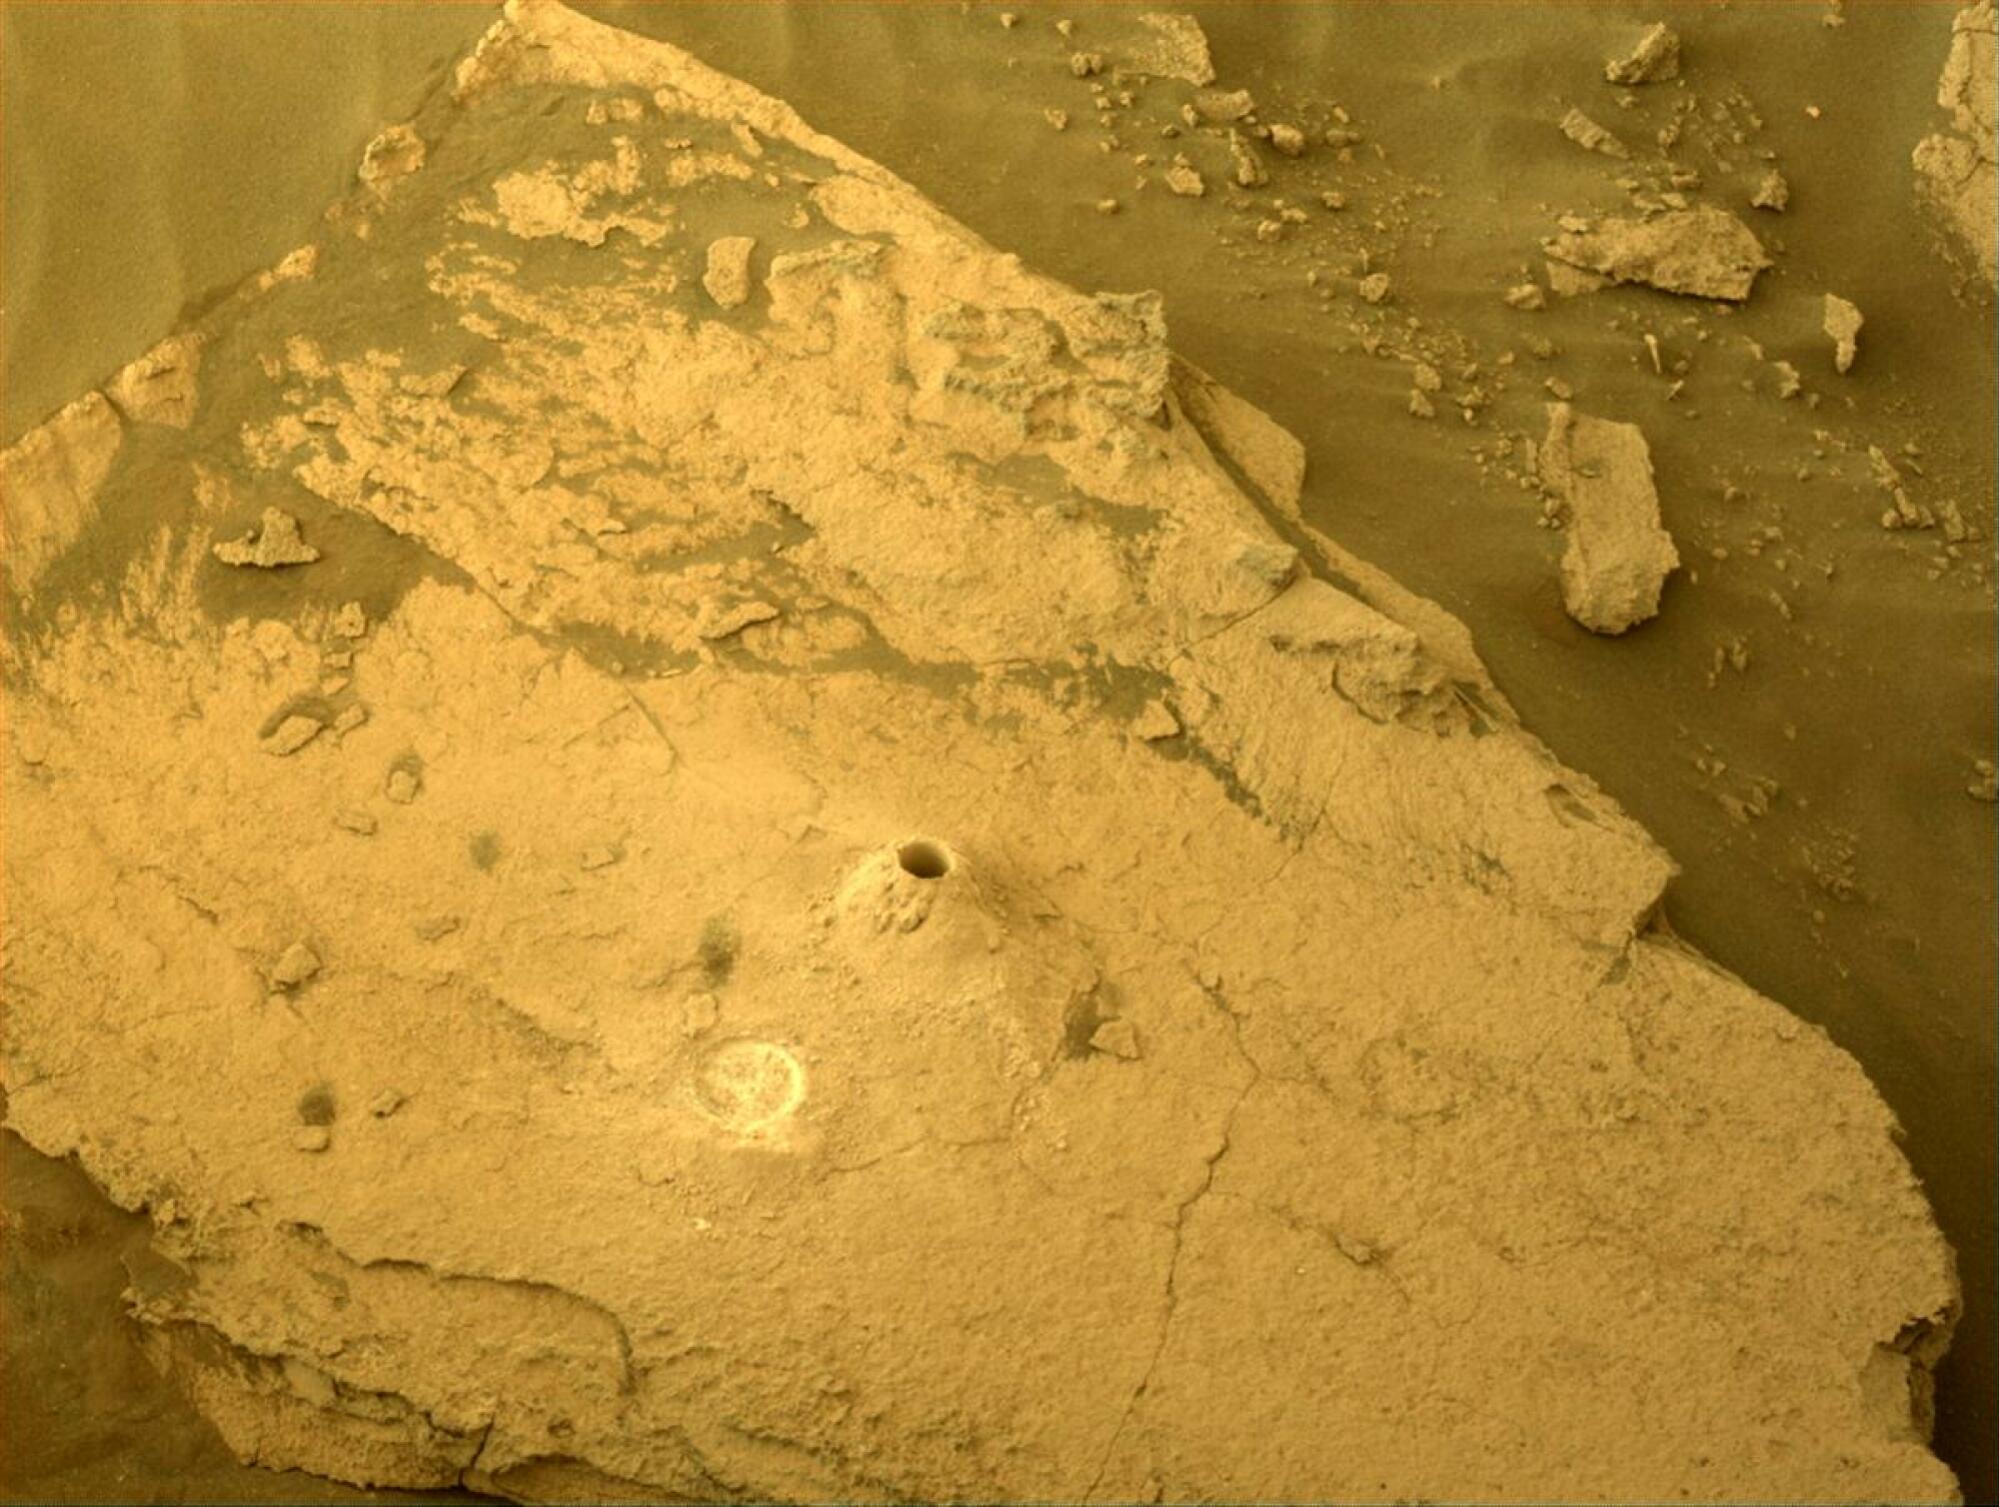 a drilled hole on the Martian ground